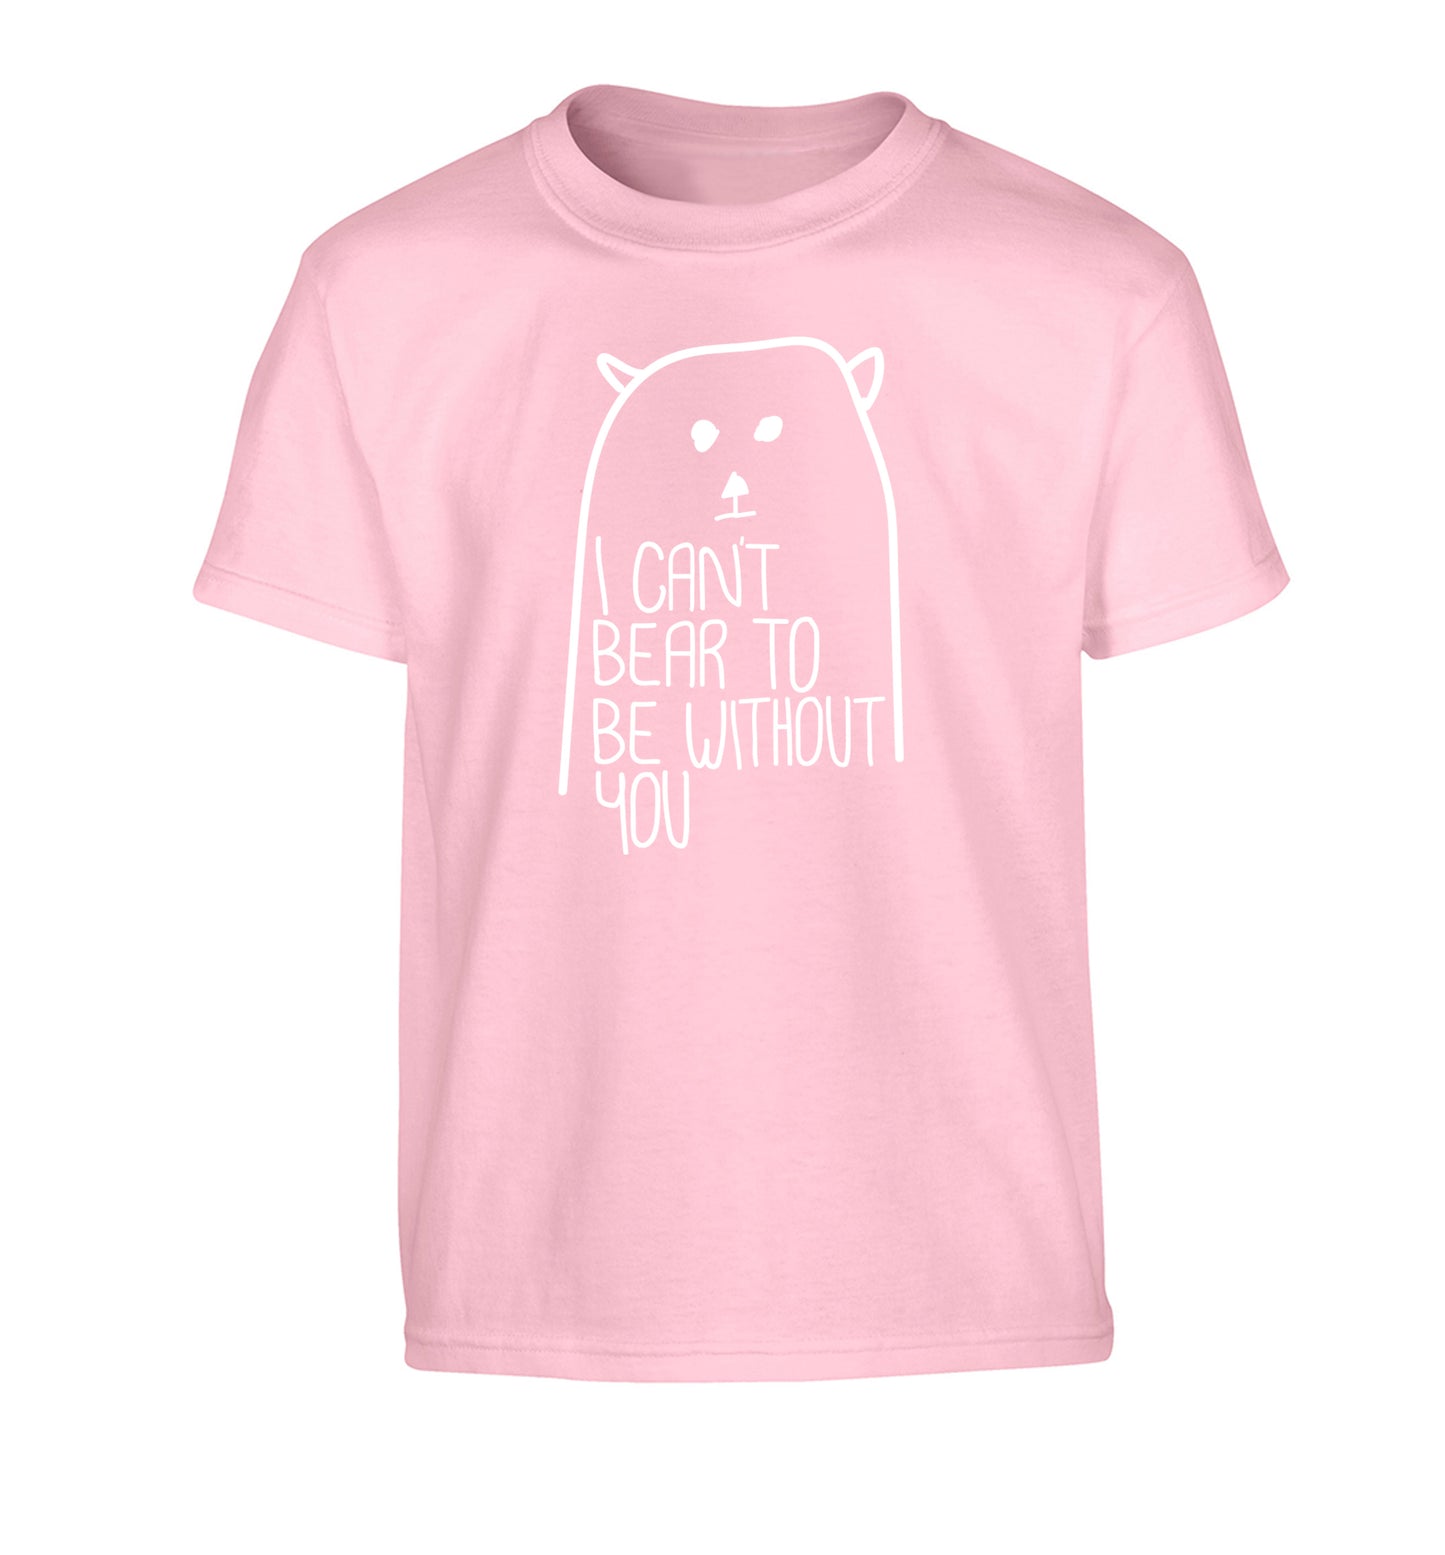 I can't bear to be without you Children's light pink Tshirt 12-13 Years